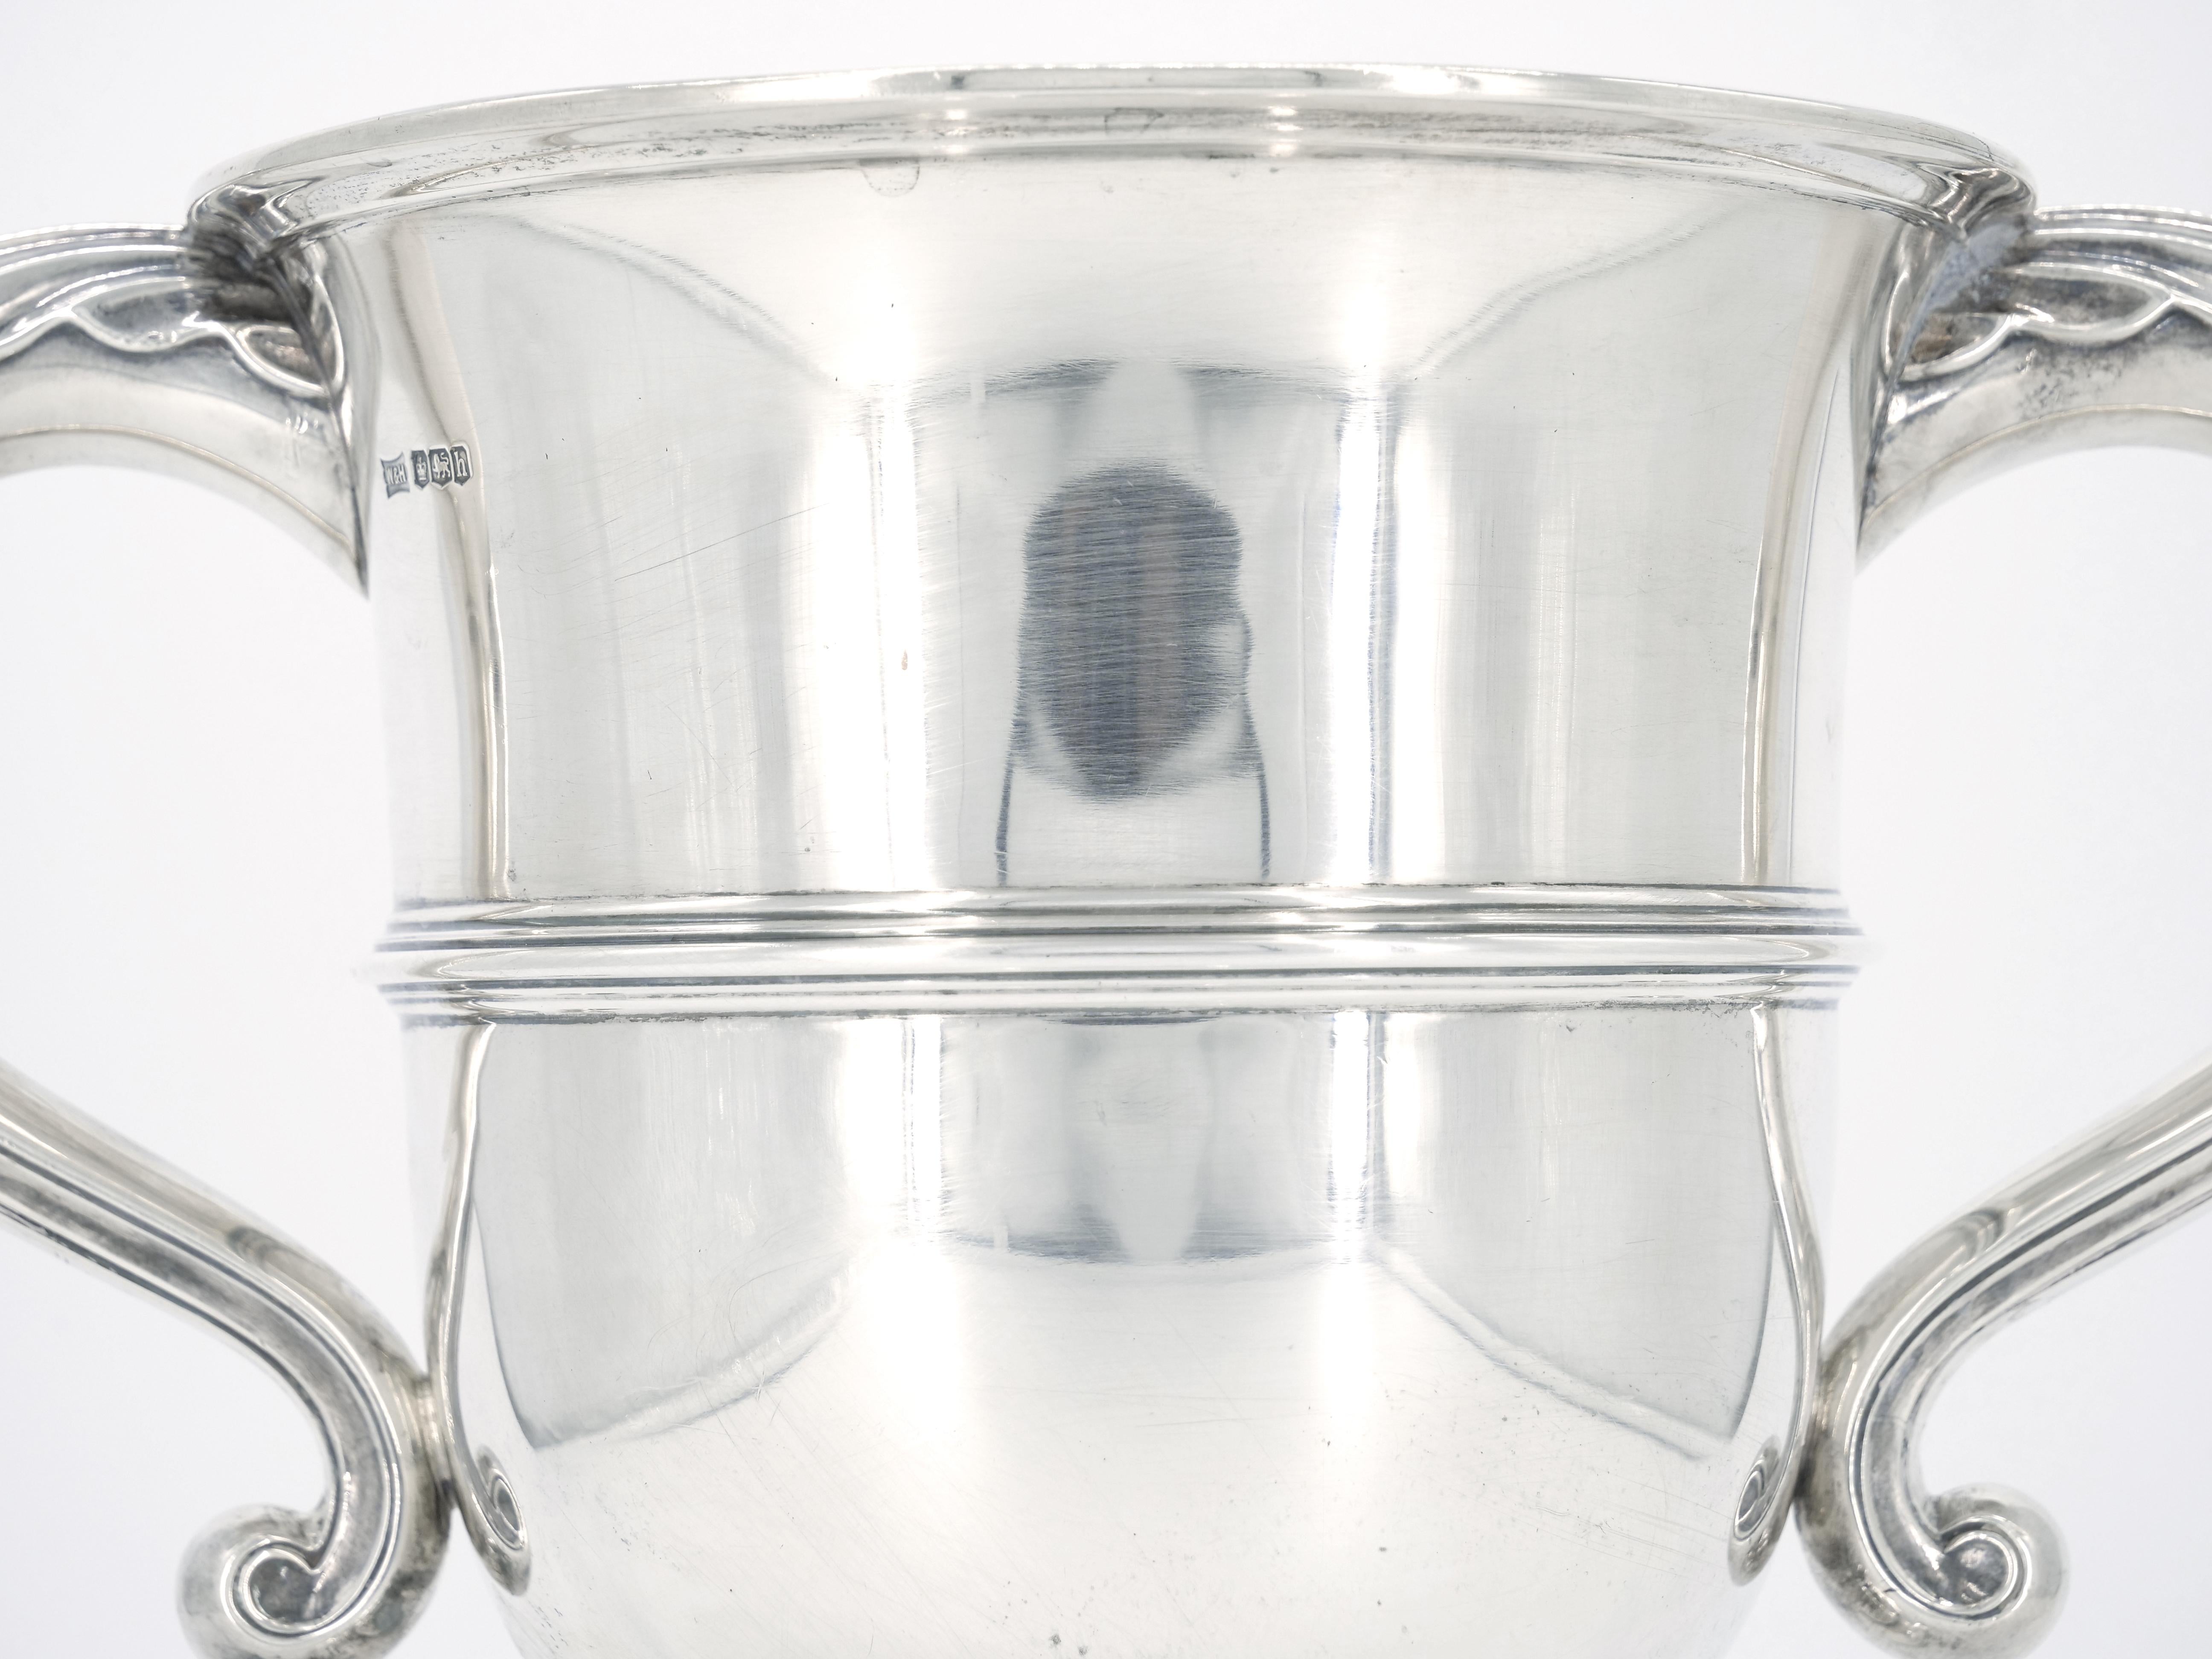 Mid-20th Century English Sterling Silver Barware Ice Bucket / Cooler By Walker & Hall For Sale